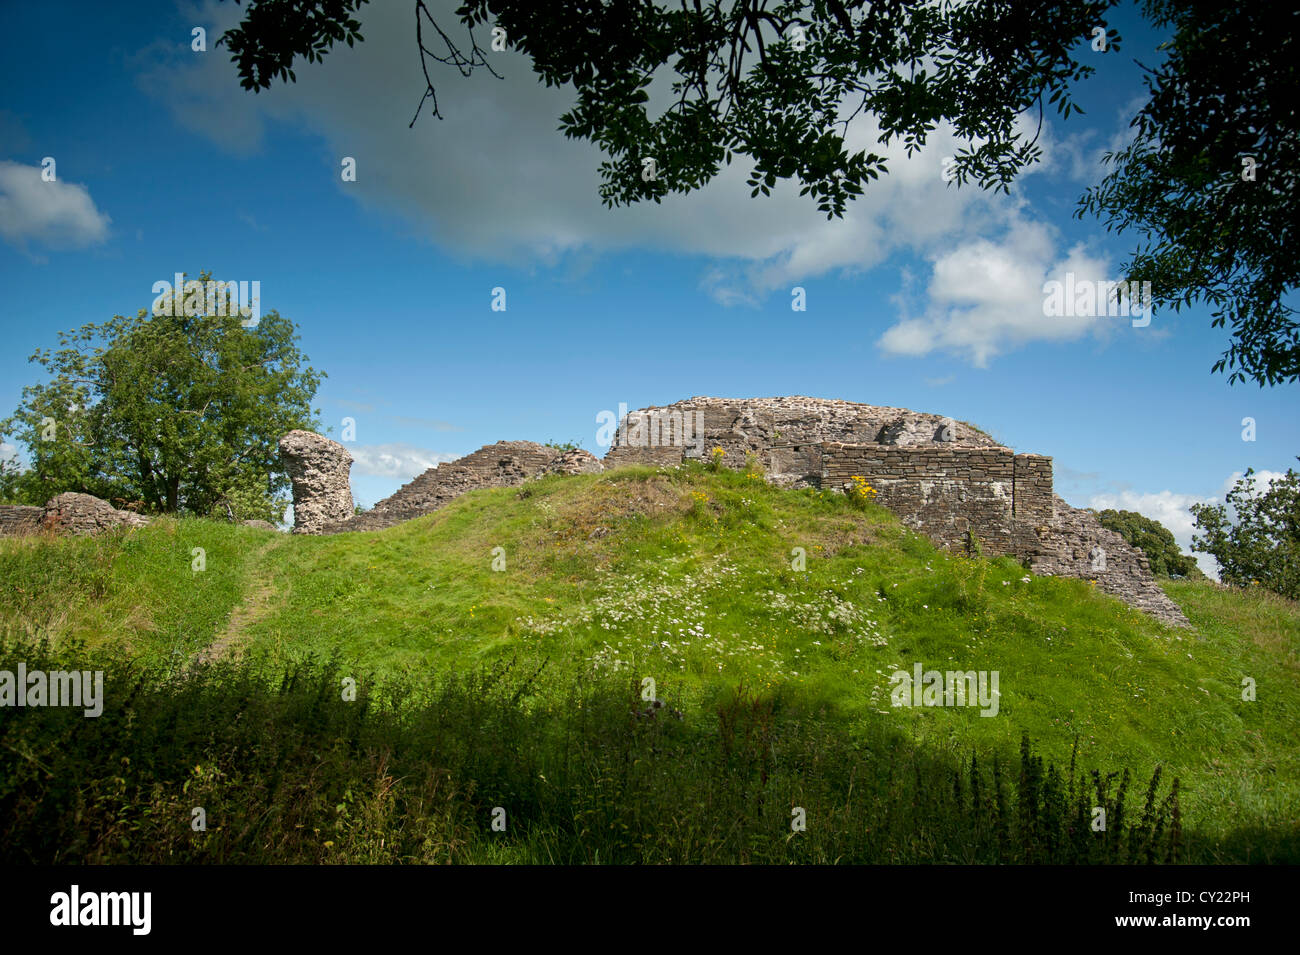 Dolforwyn Castle, recently excavated ruins in Powys, Montgomeryshire. Mid Wales.   SCO  8712 Stock Photo